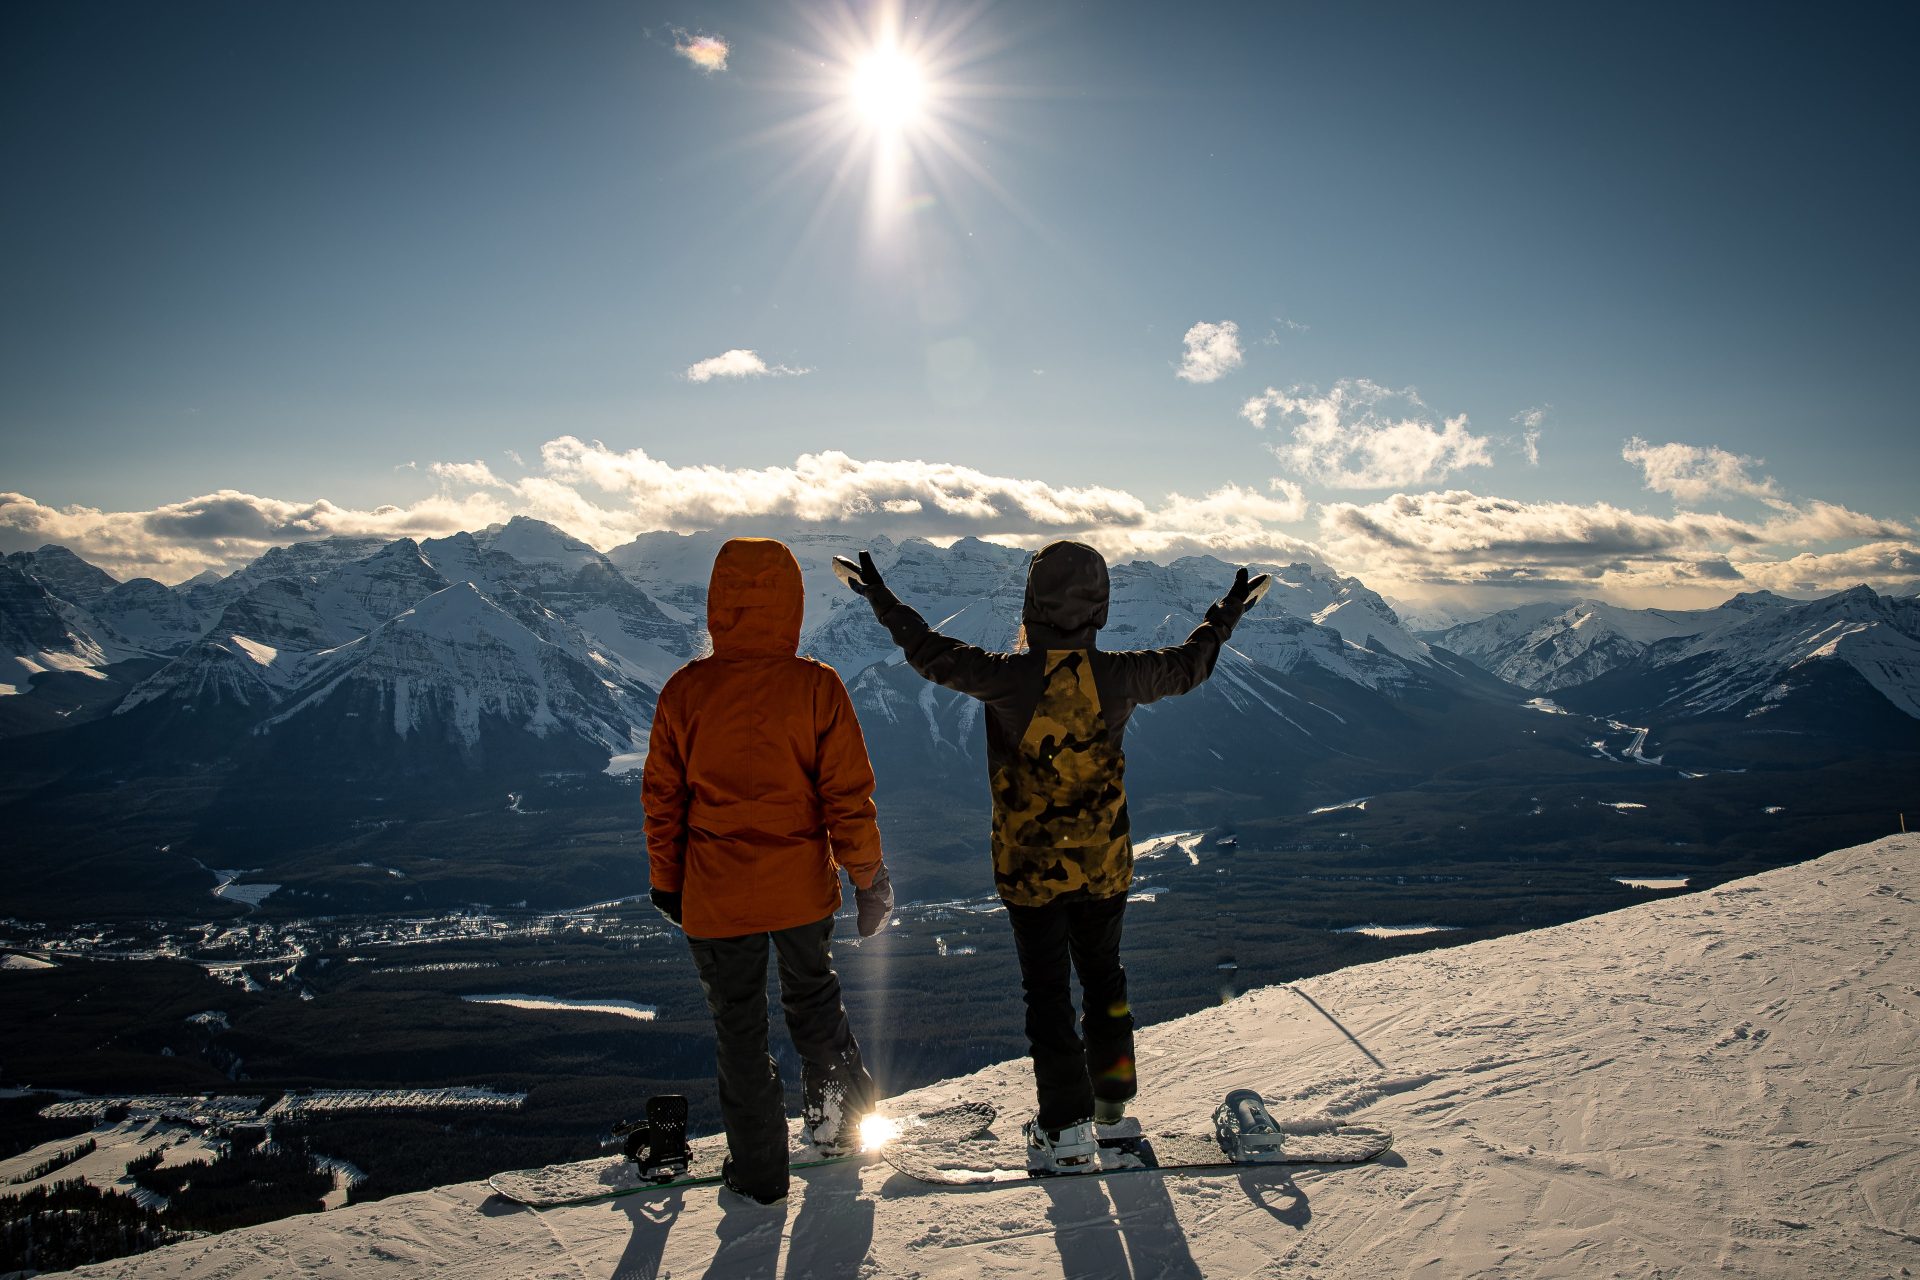 Snowboarders looking from the top of Lake Louise Ski Resort